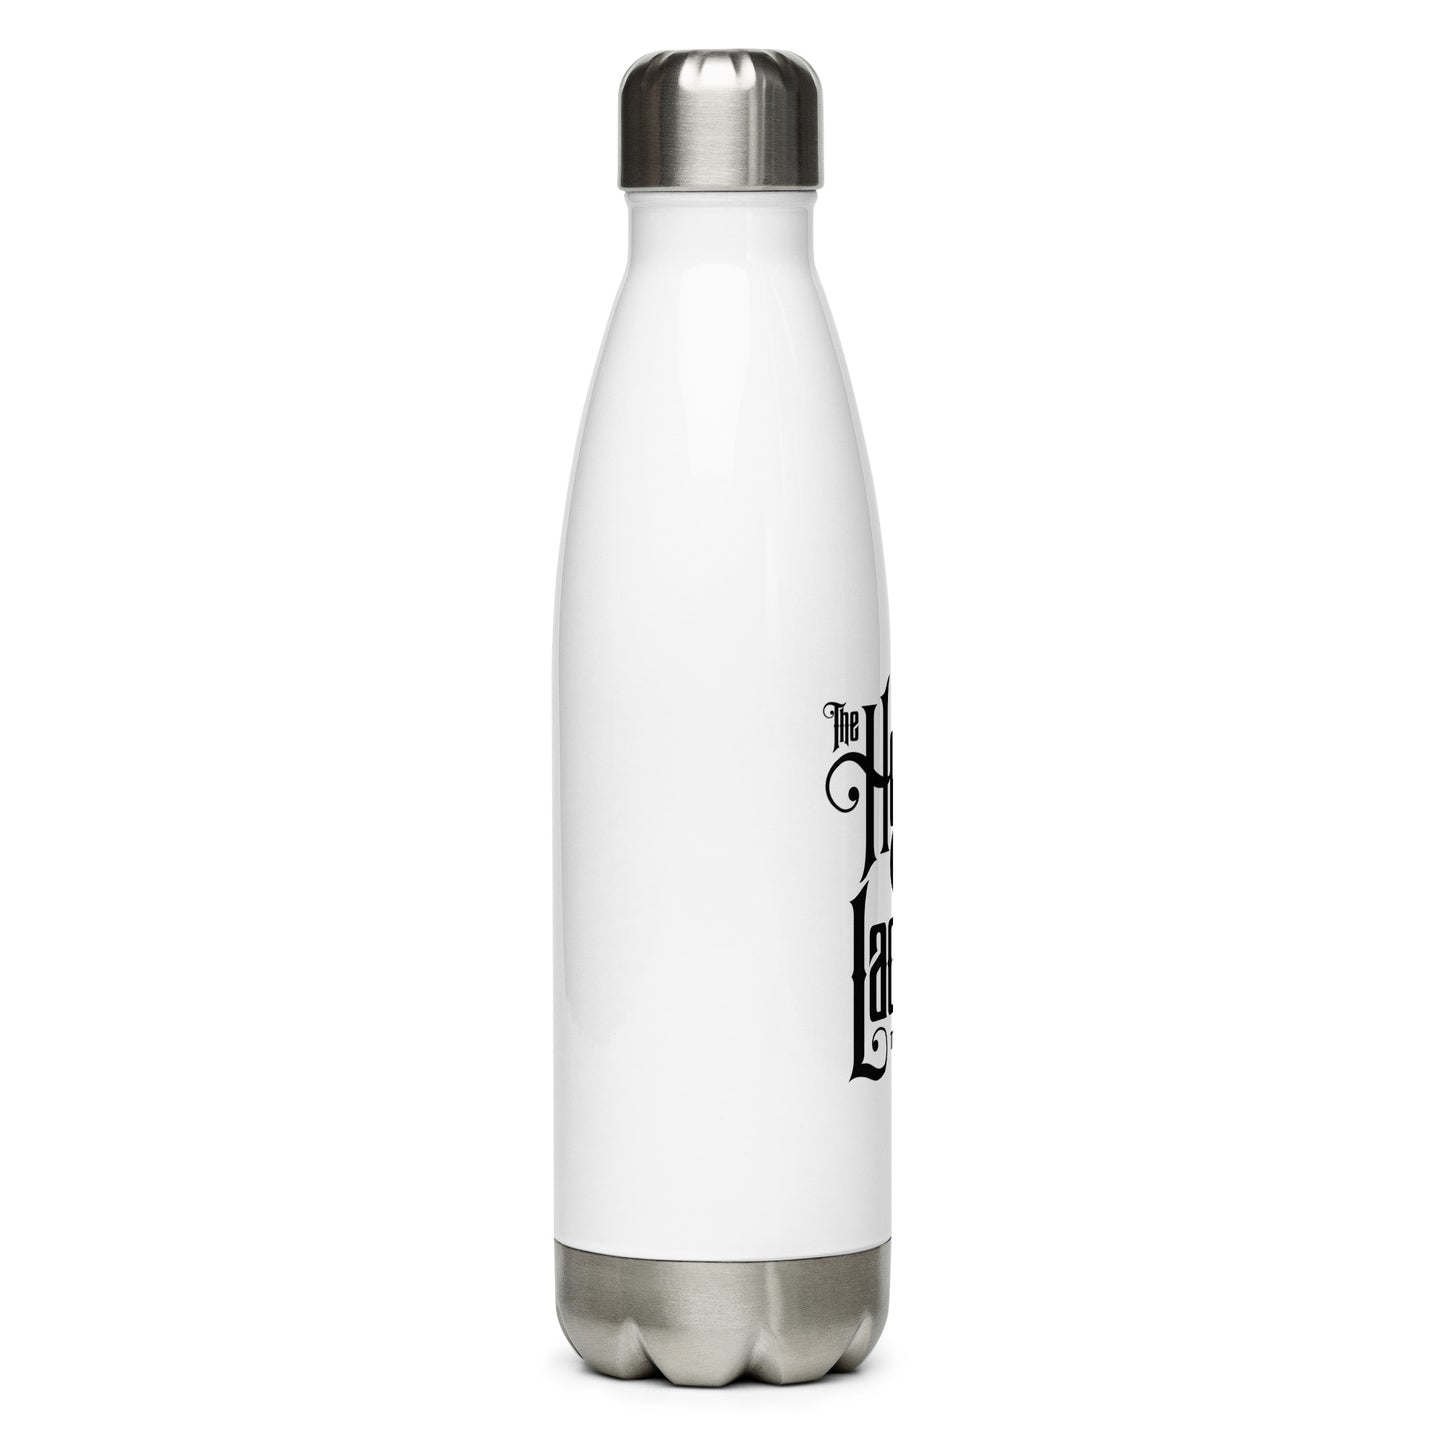 Hook and Ladder - Stainless Steel Water Bottle